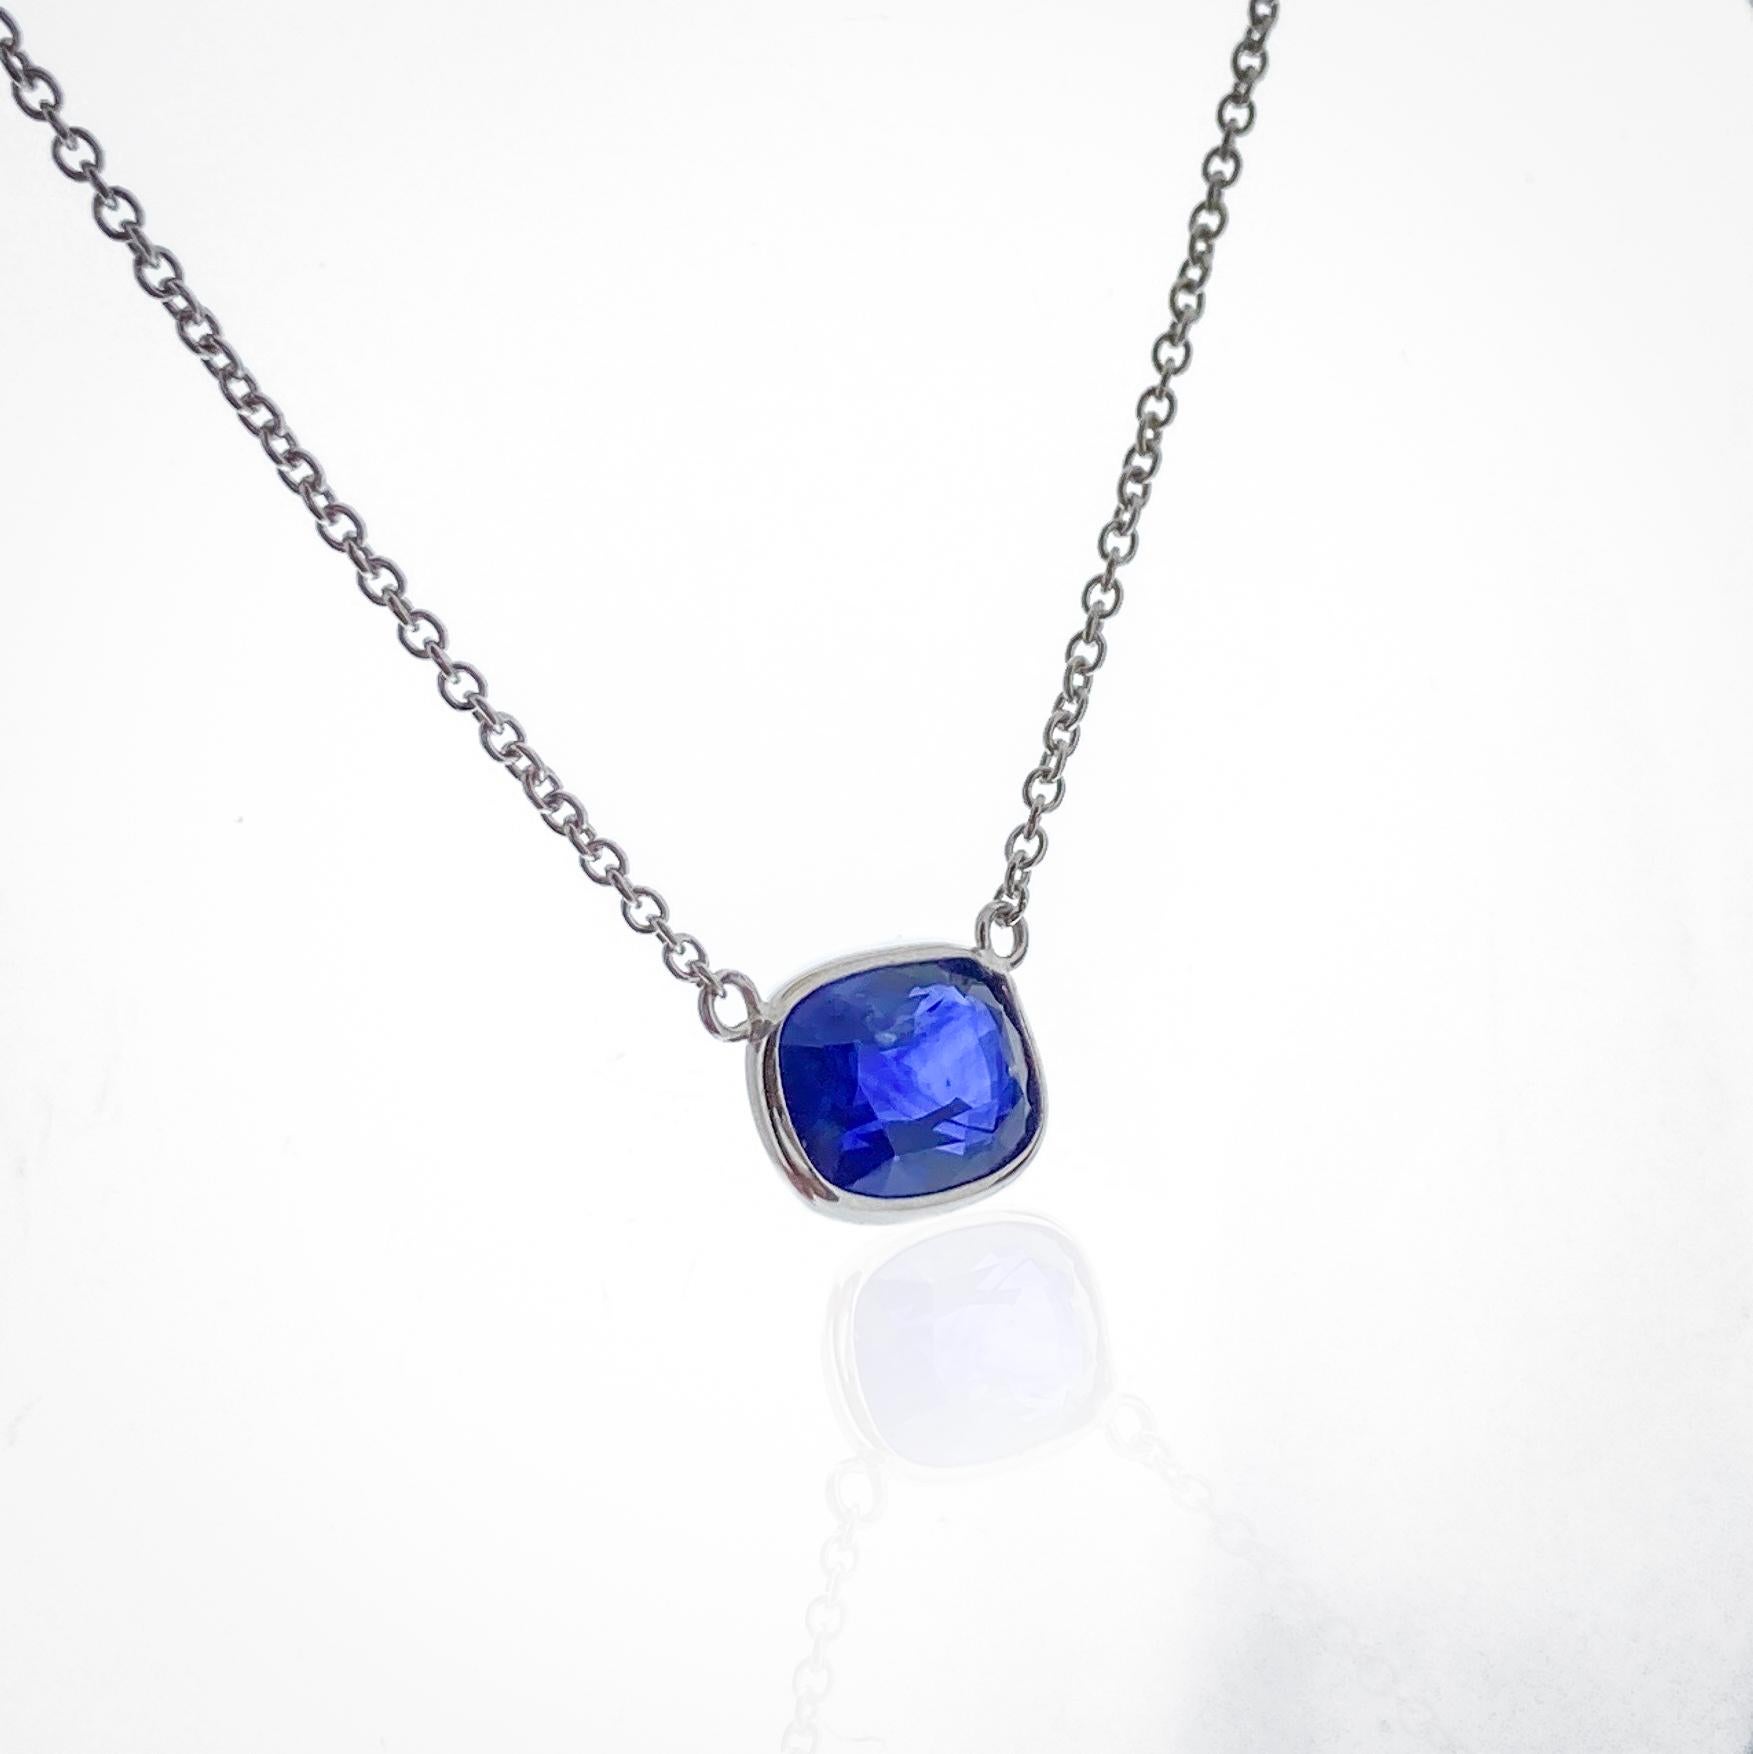 This necklace features a cushion-cut blue sapphire with a weight of 2.64 carats, set in 14k white gold (WG). Blue sapphires are highly sought after for their deep and rich color, making them a classic choice for jewelry. The cushion cut is a popular